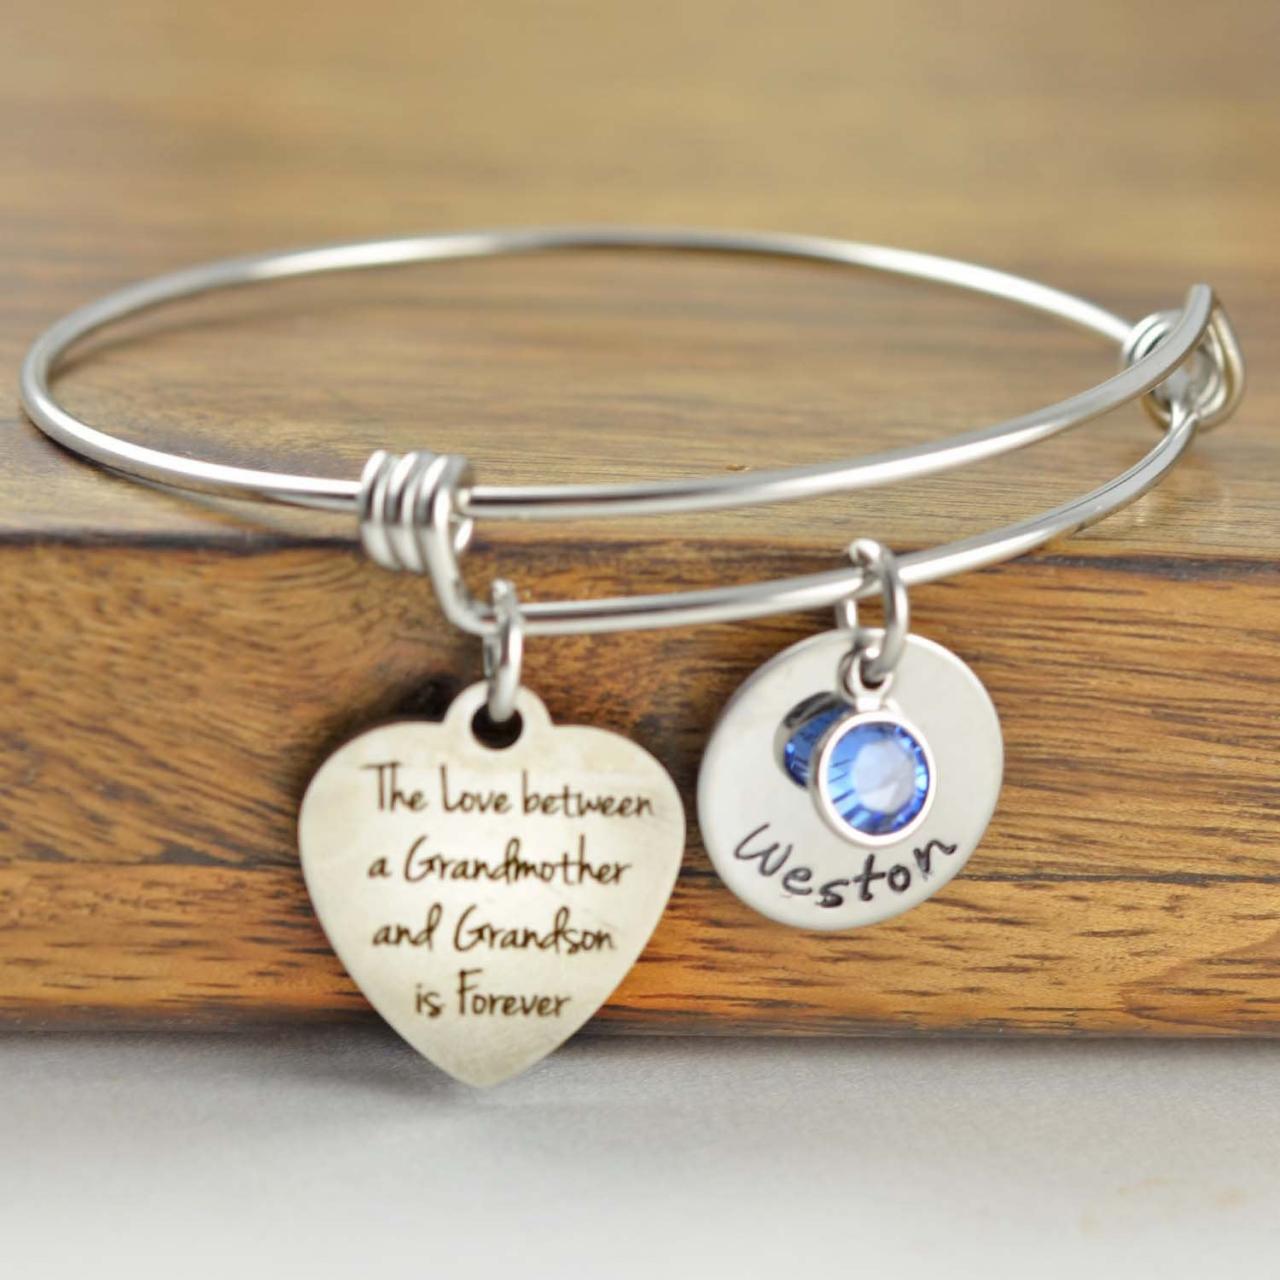 The Love Between A Grandmother And Grandson Is Forever Bracelet, Gift For Grandmother, Gift For Grandma, Grandmother Gift, Grandma Gift